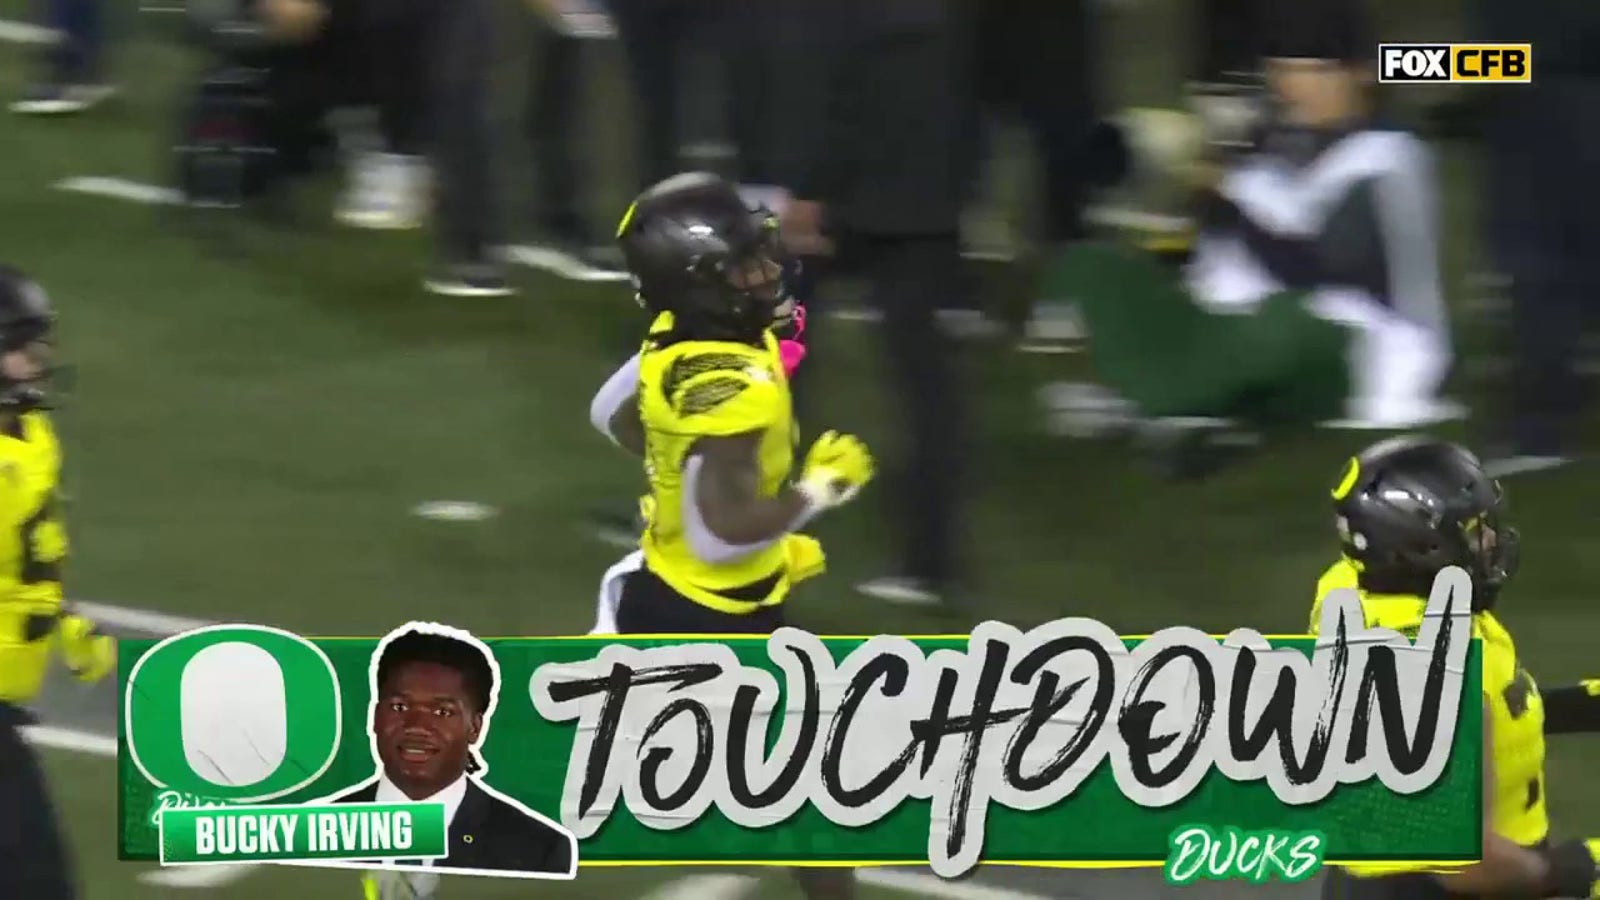 Bucky Irving rushes for a TOUGH 19-yard TD to extend Oregon's lead vs. USC